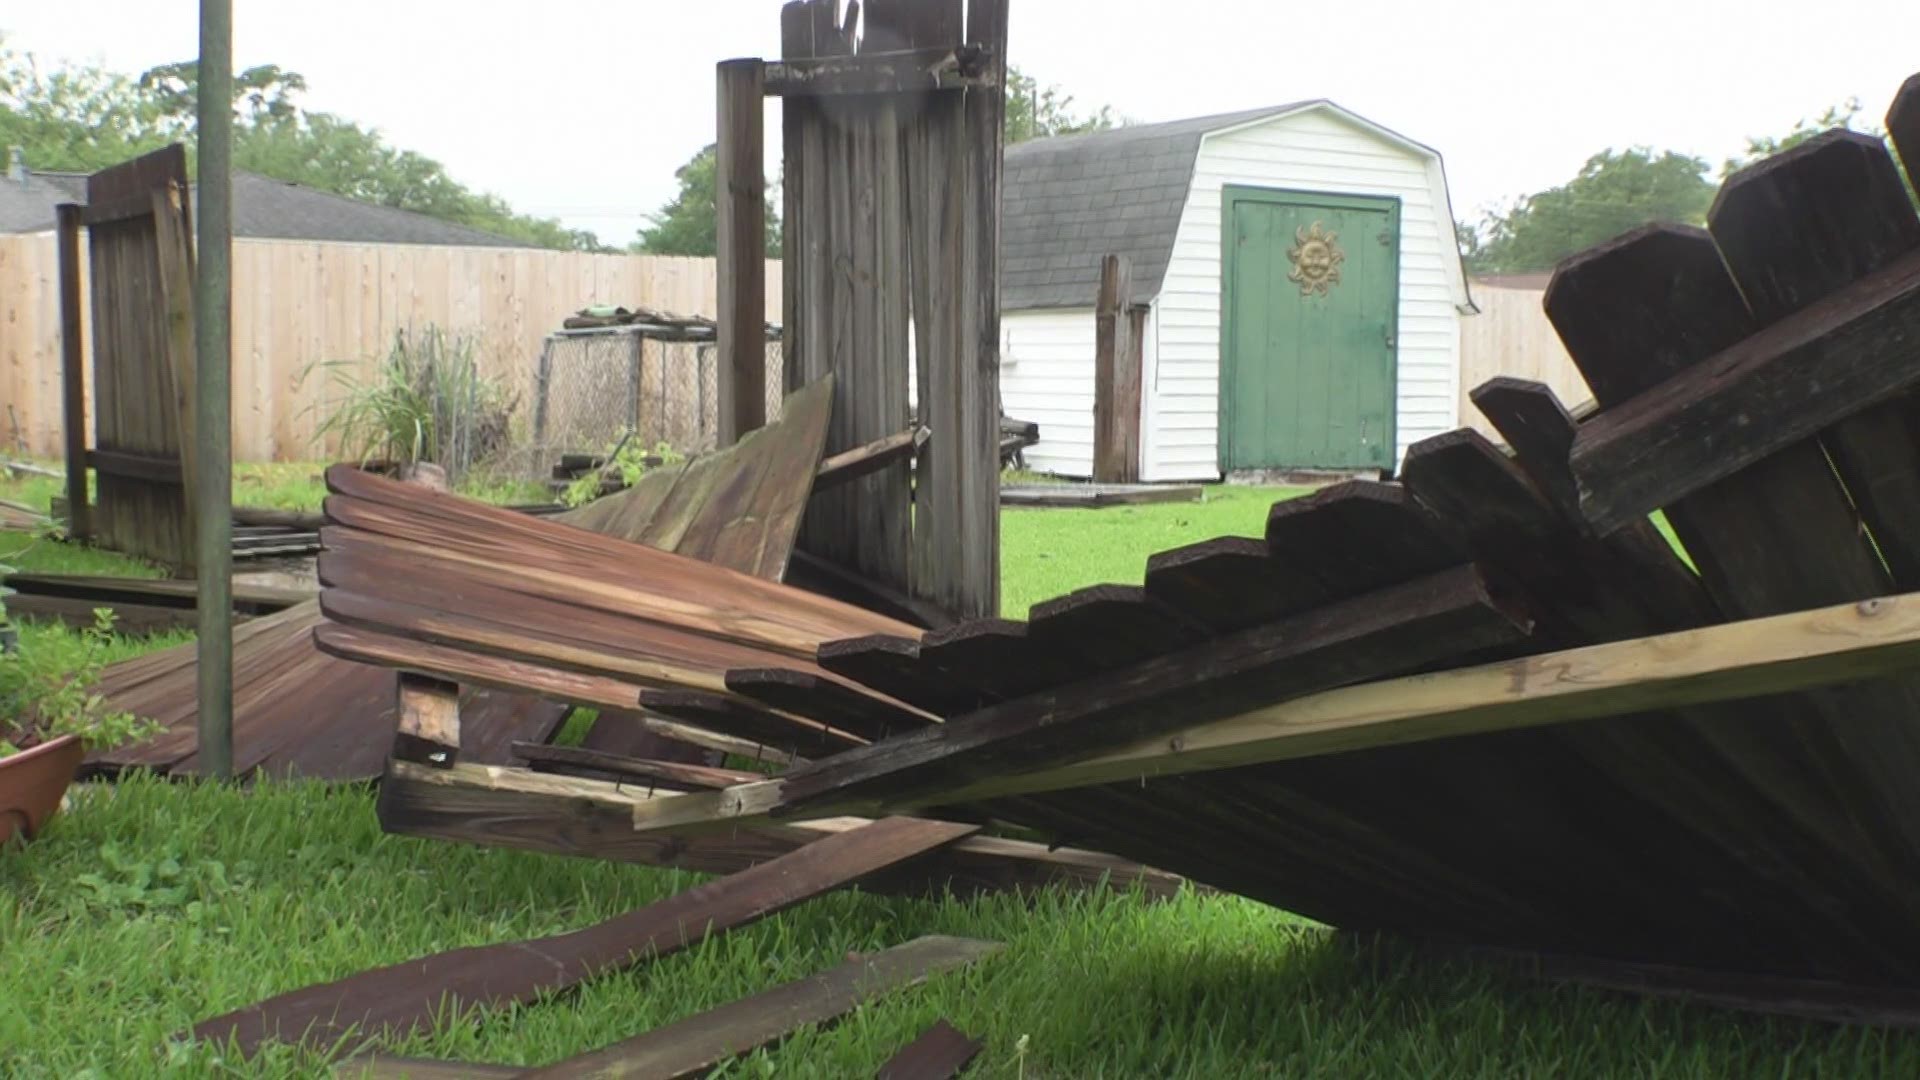 Officials confirmed an EF0 tornado landed in Luling, residents said t went so fast there was barely time to react.